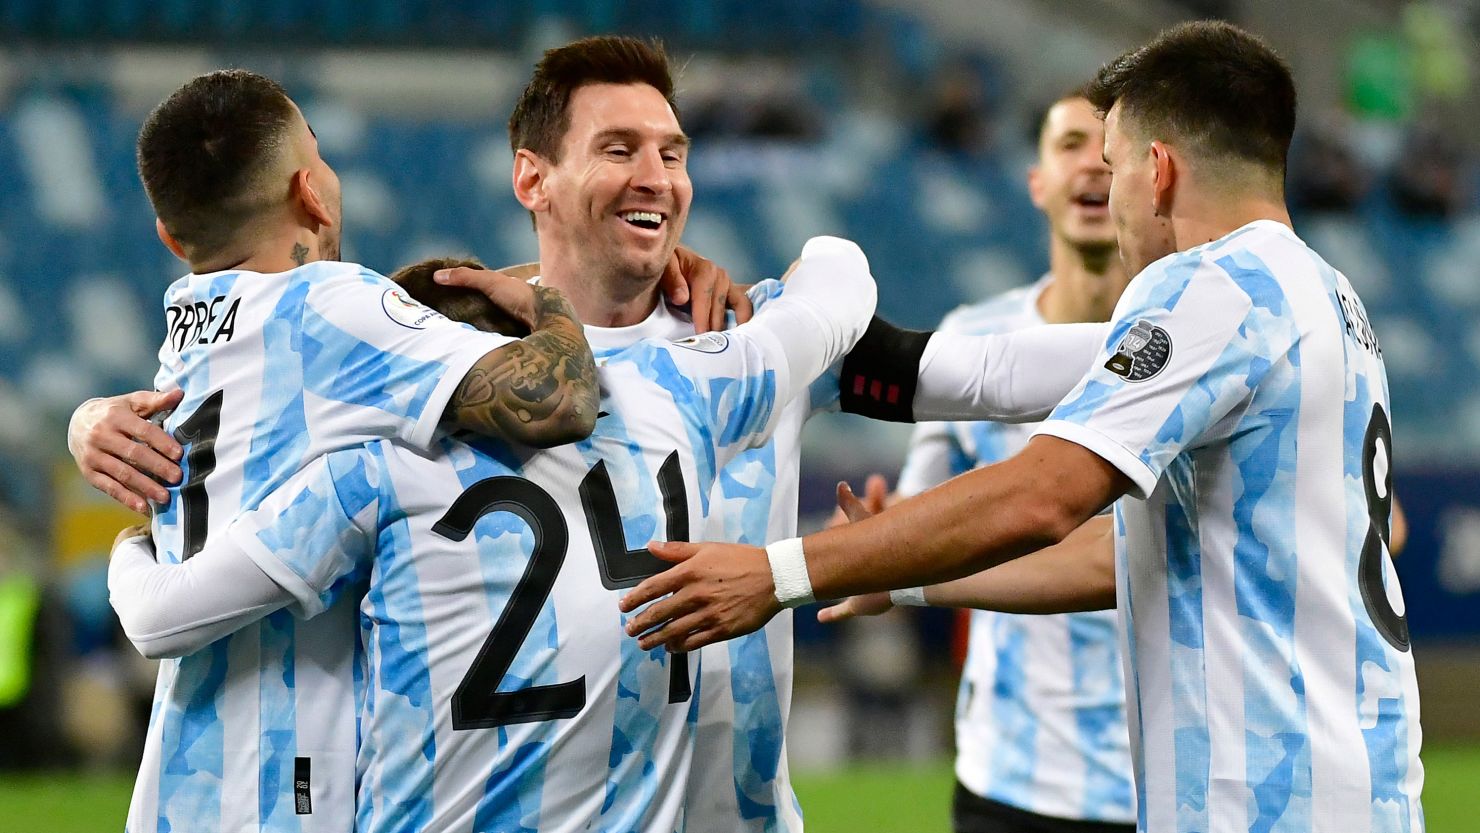 Lionel Messi surpassed Javier Mascherano as Argentina's most capped player in his 148th national appearance. 